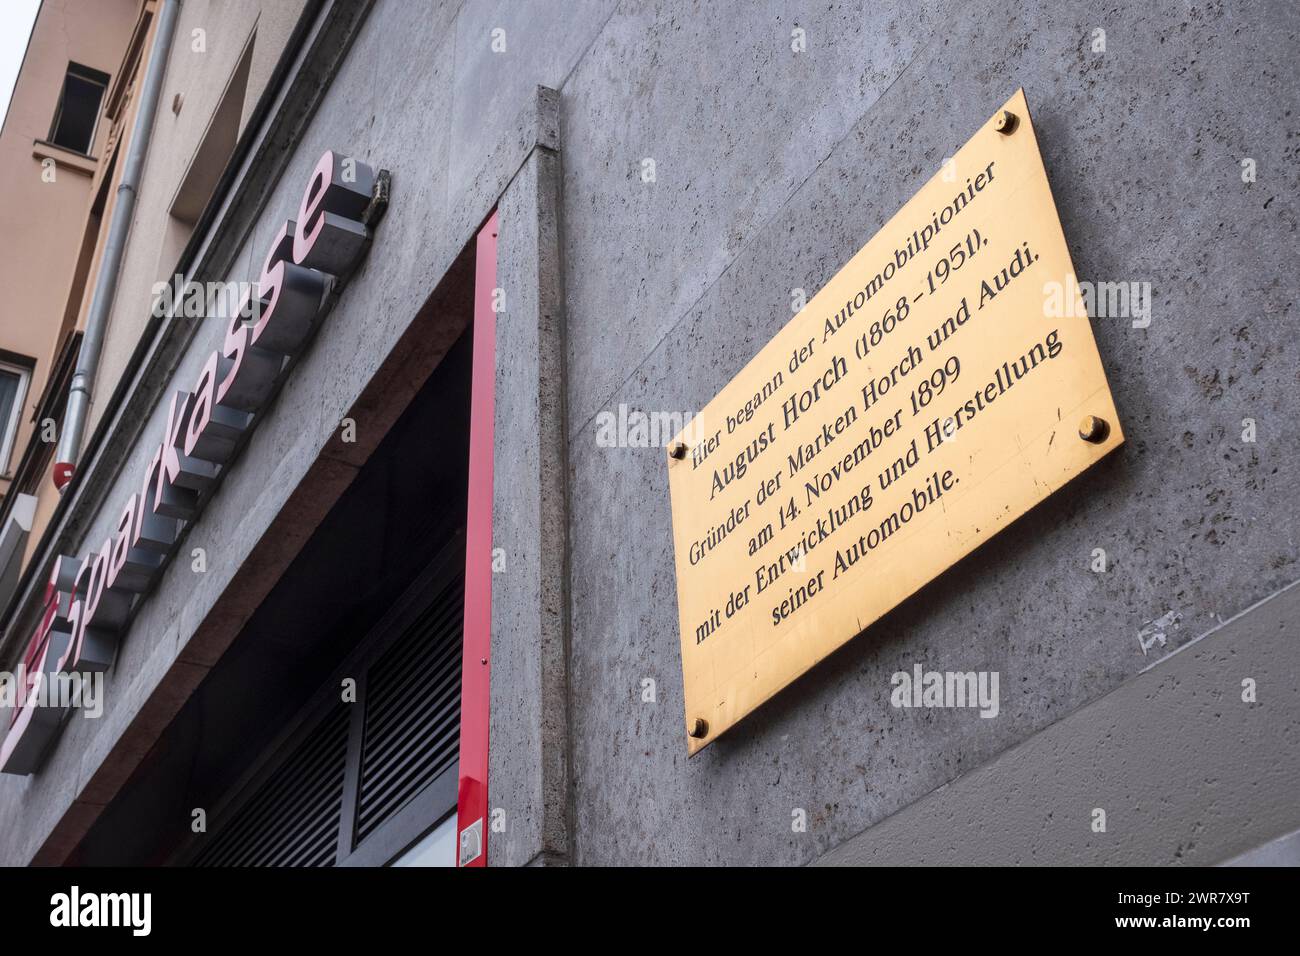 In the Ehrenfeld district of Cologne,at Venloerstrasse 293, there is a plaque commemorating the fact that August Horch, who later founded Audi Stock Photo